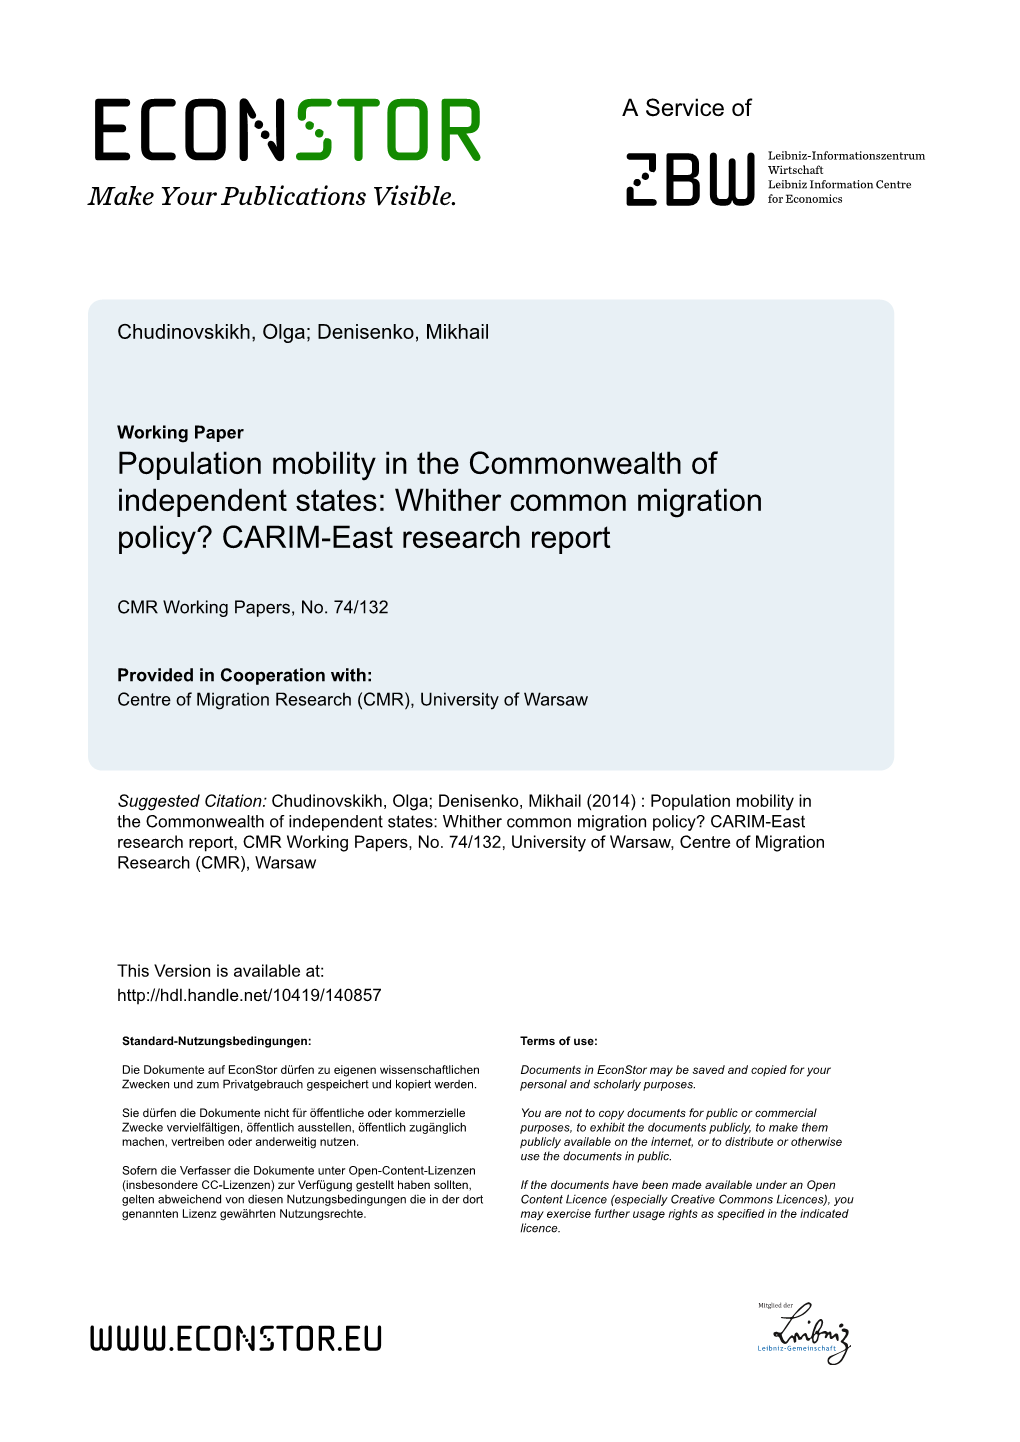 Whither Common Migration Policy? CARIM-East Research Report